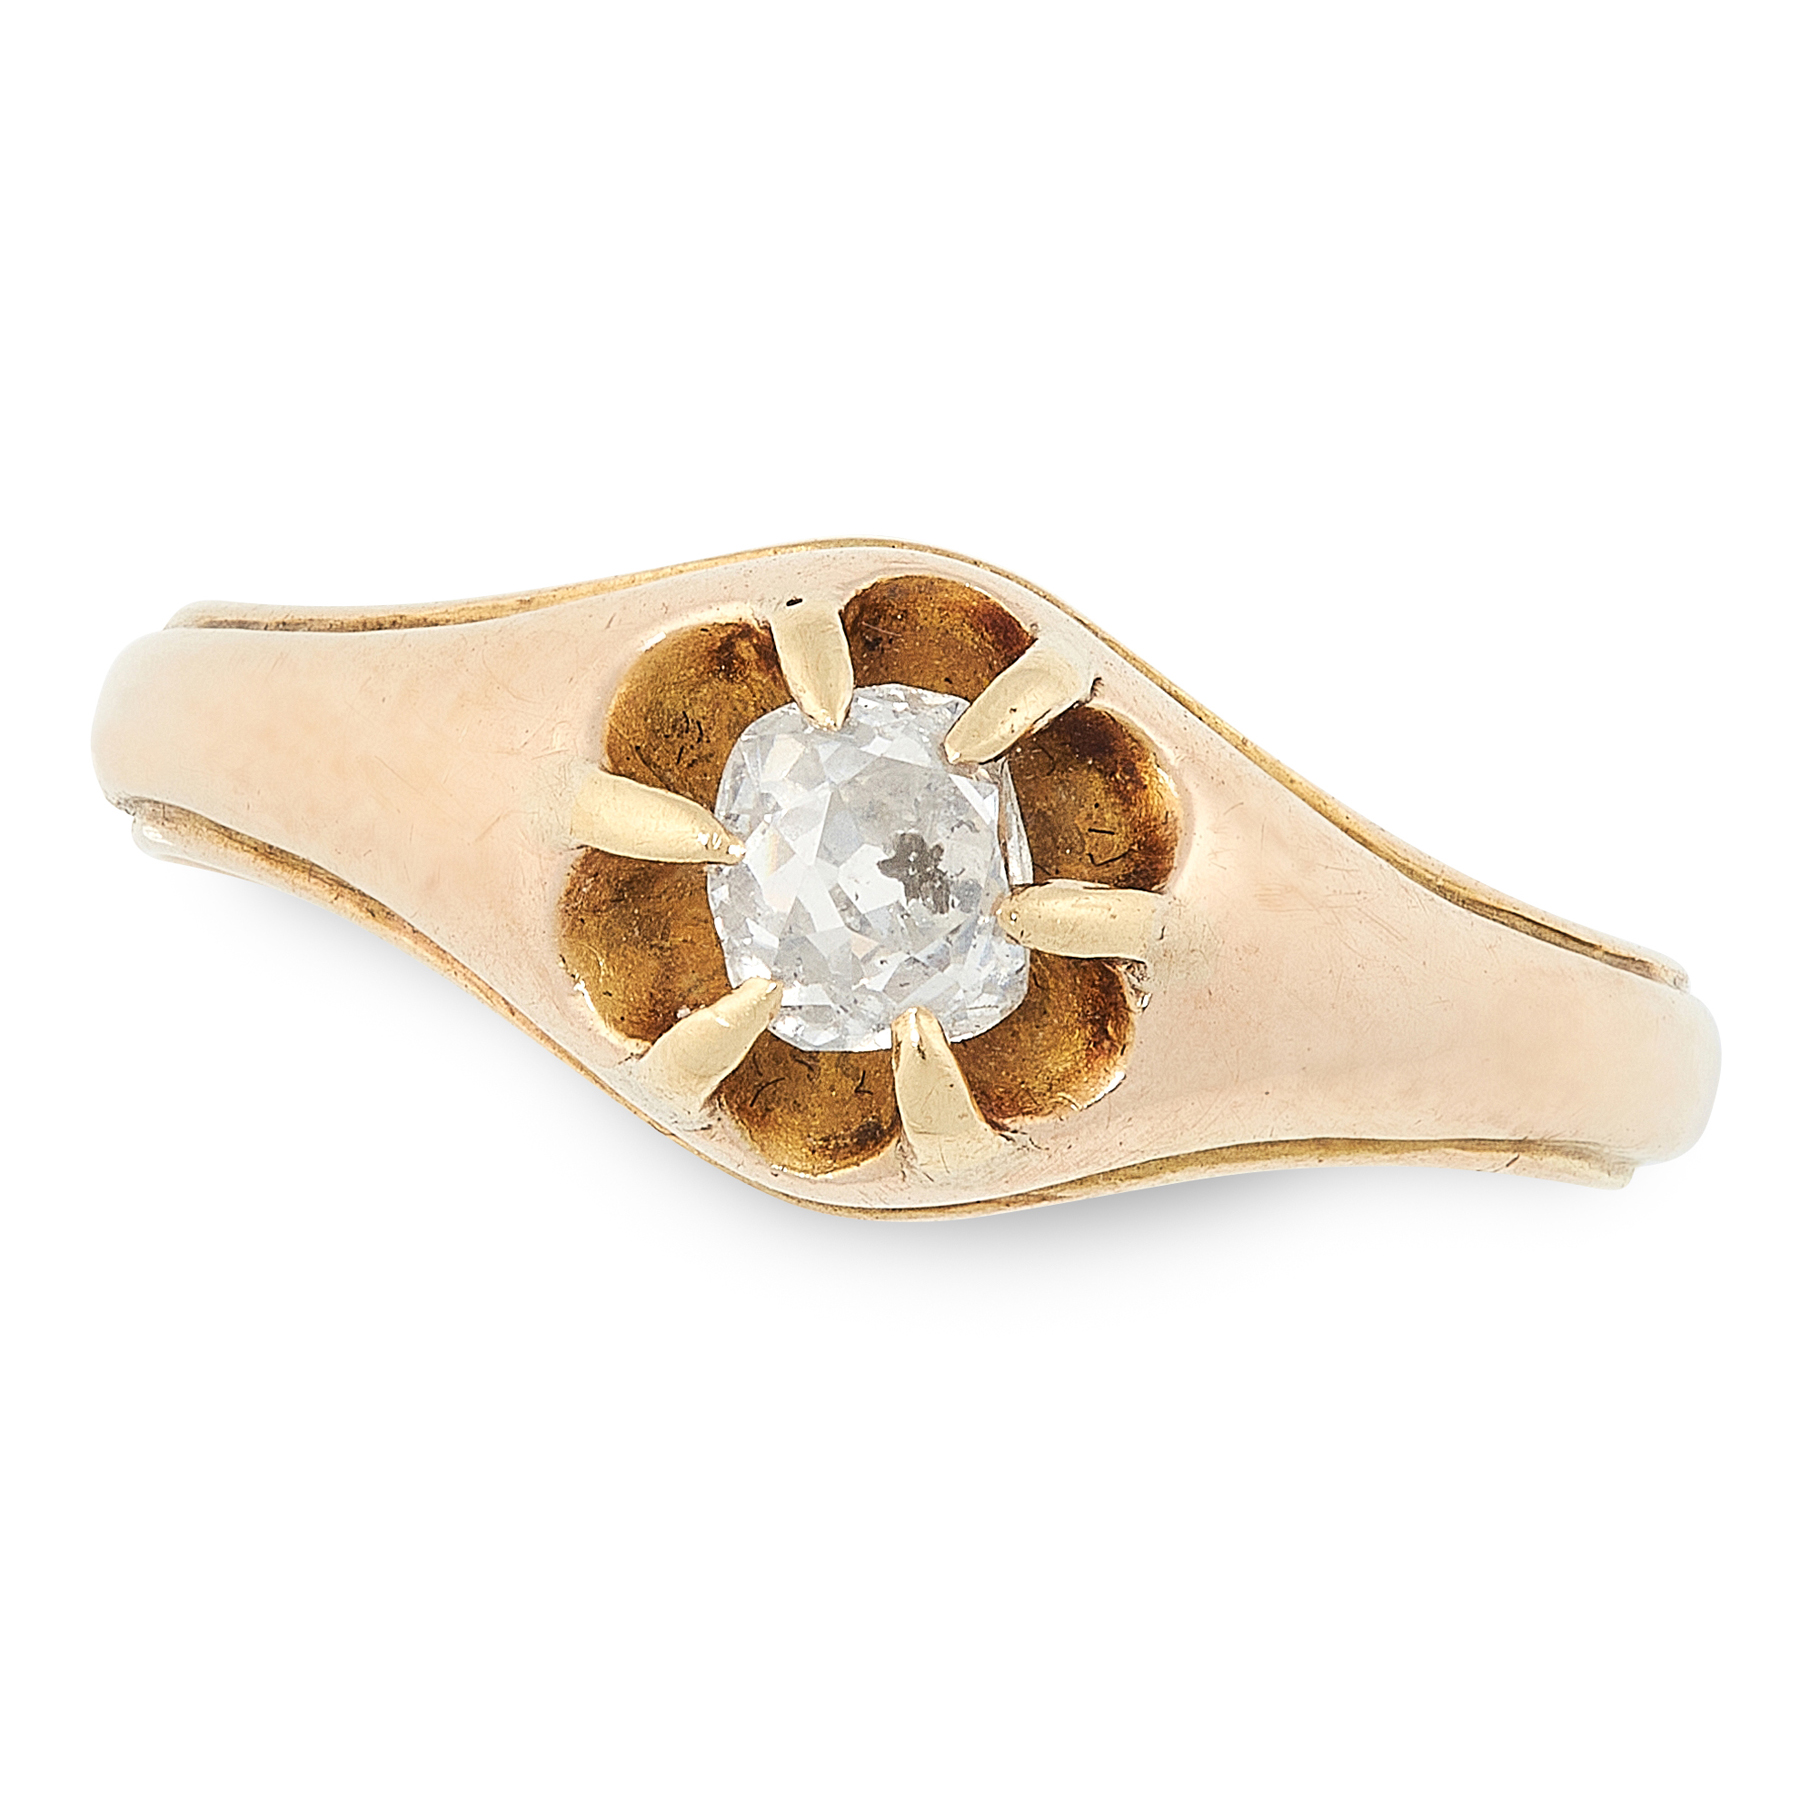 AN ANTIQUE DIAMOND DRESS RING in 18ct yellow gold, set with a single old cut diamond of 0.40 carats,